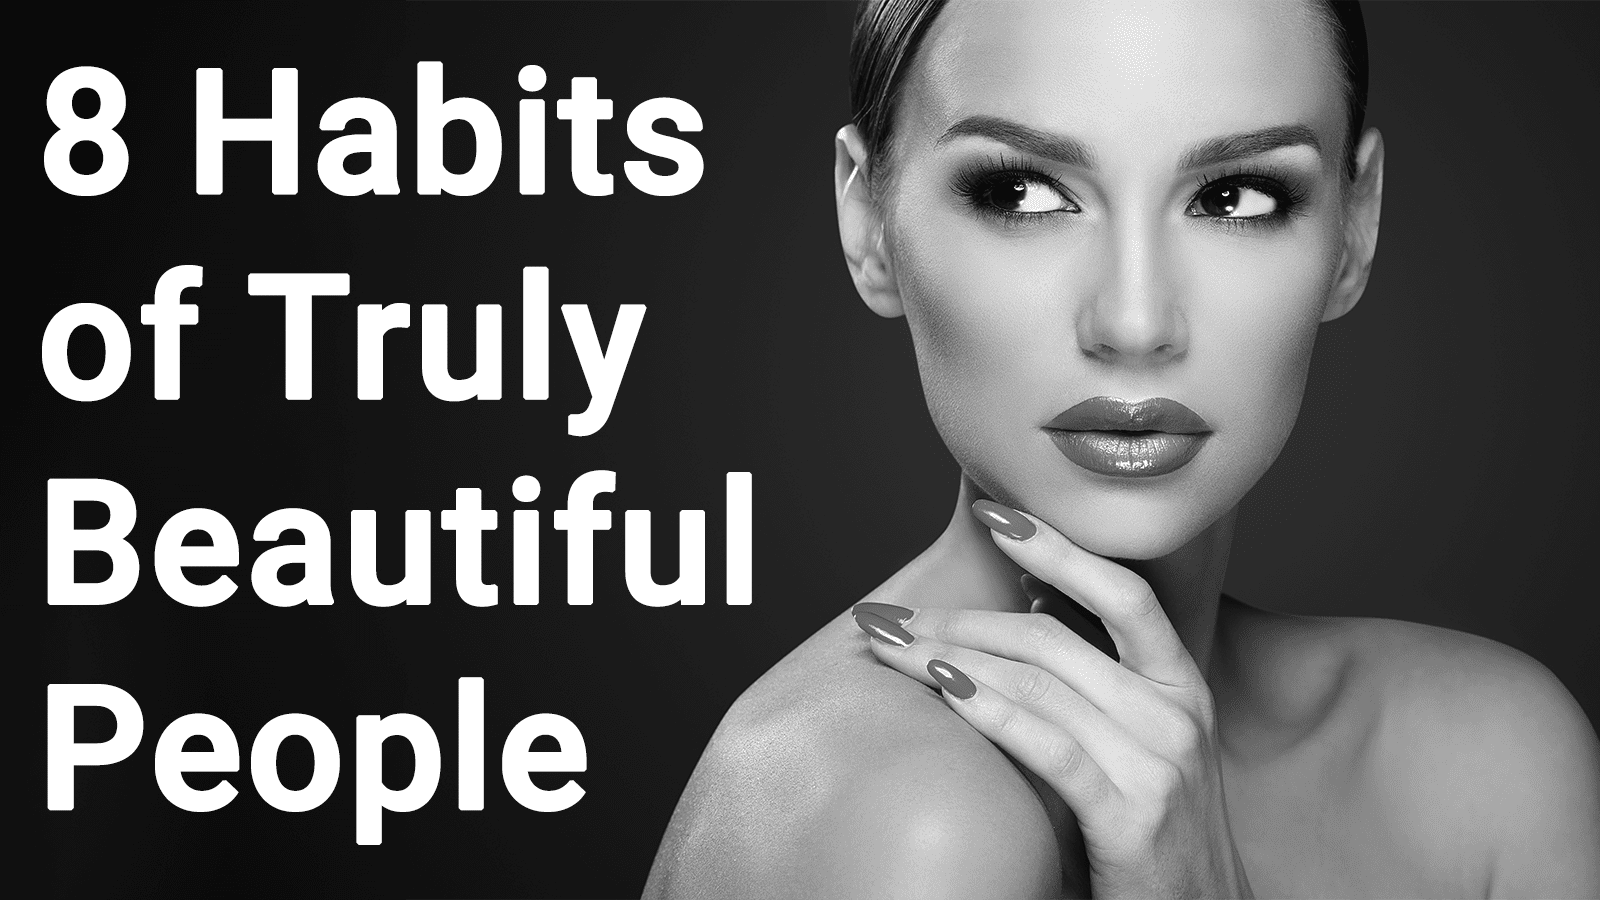 8 Habits of Truly Beautiful People